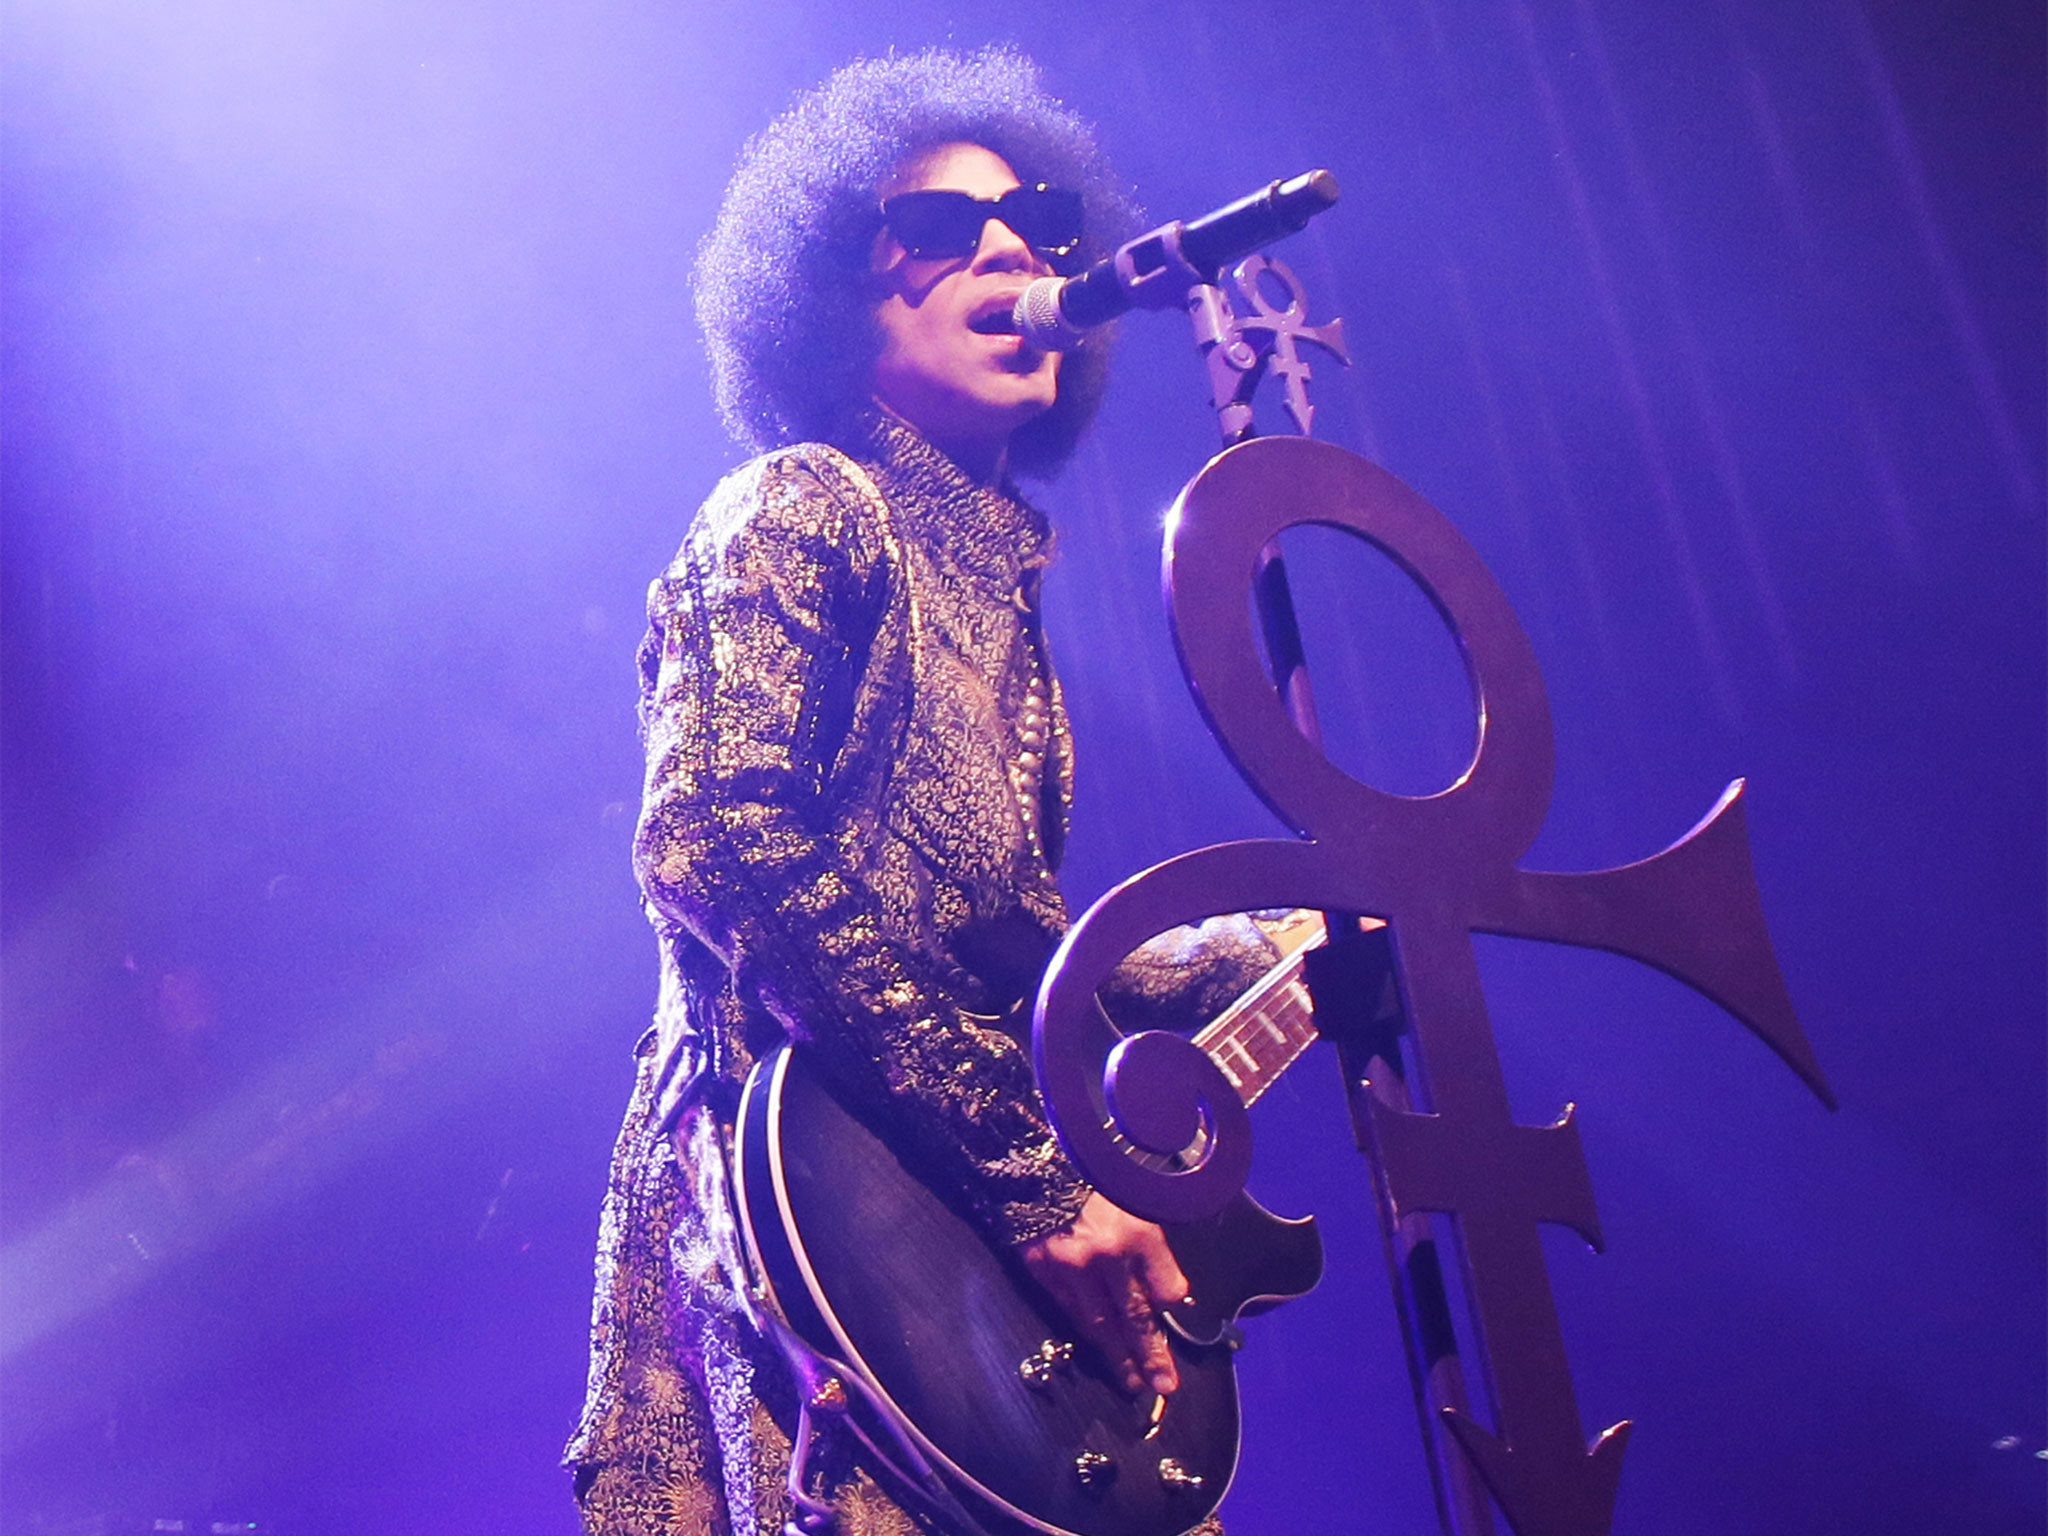 2048x1536 Prince found dead at his Paisley Park recording studio complex, aged 57 |  The Independent